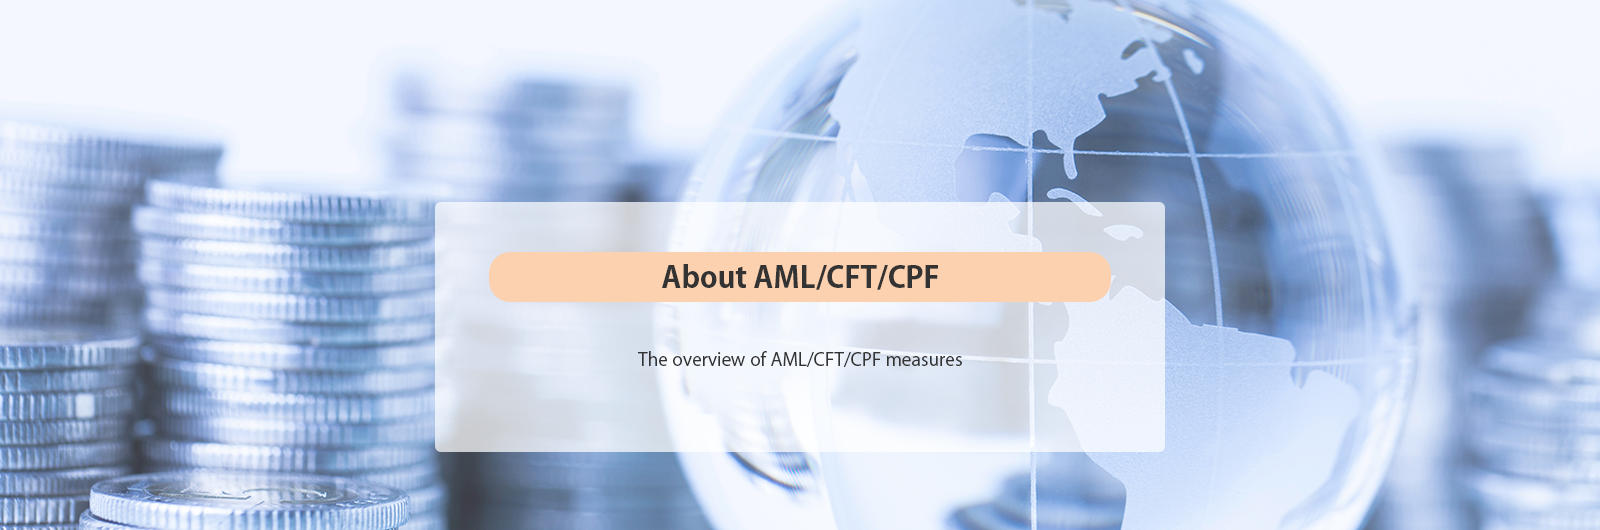 About AML/CFT/CPF